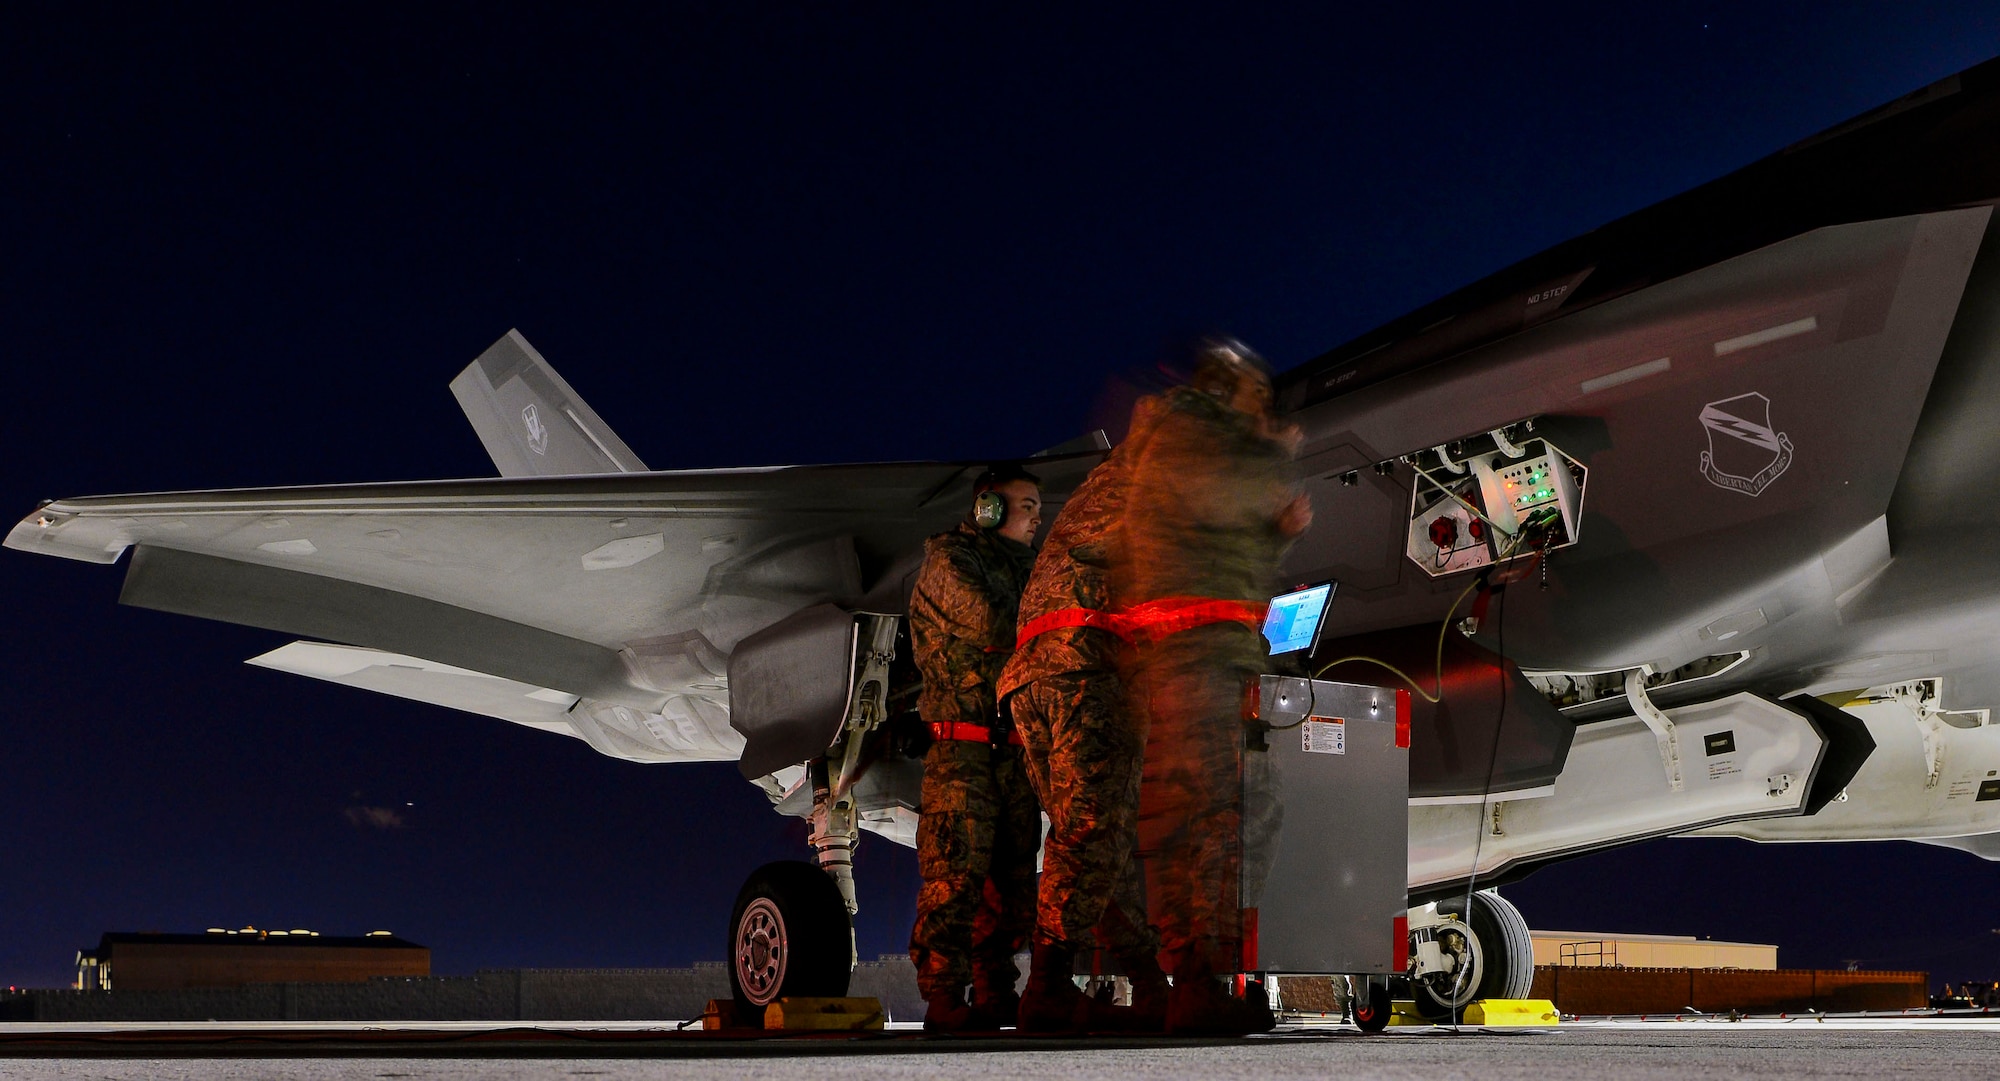 Maintainers from the 419th and 388th Fighter Wings conduct conducts preflight checks on an F-35A Lightning II from Hill Air Force Base, Utah, during Red Flag 17-1 at Nellis Air Force Base, Nev., Jan. 24, 2017. The F-35A will
be participating in Red Flag 17-1, making it the first iteration to incorporate the fifth generation fighter. (U.S. Air Force photo by Airman 1st Class Nathan Byrnes/Released)
